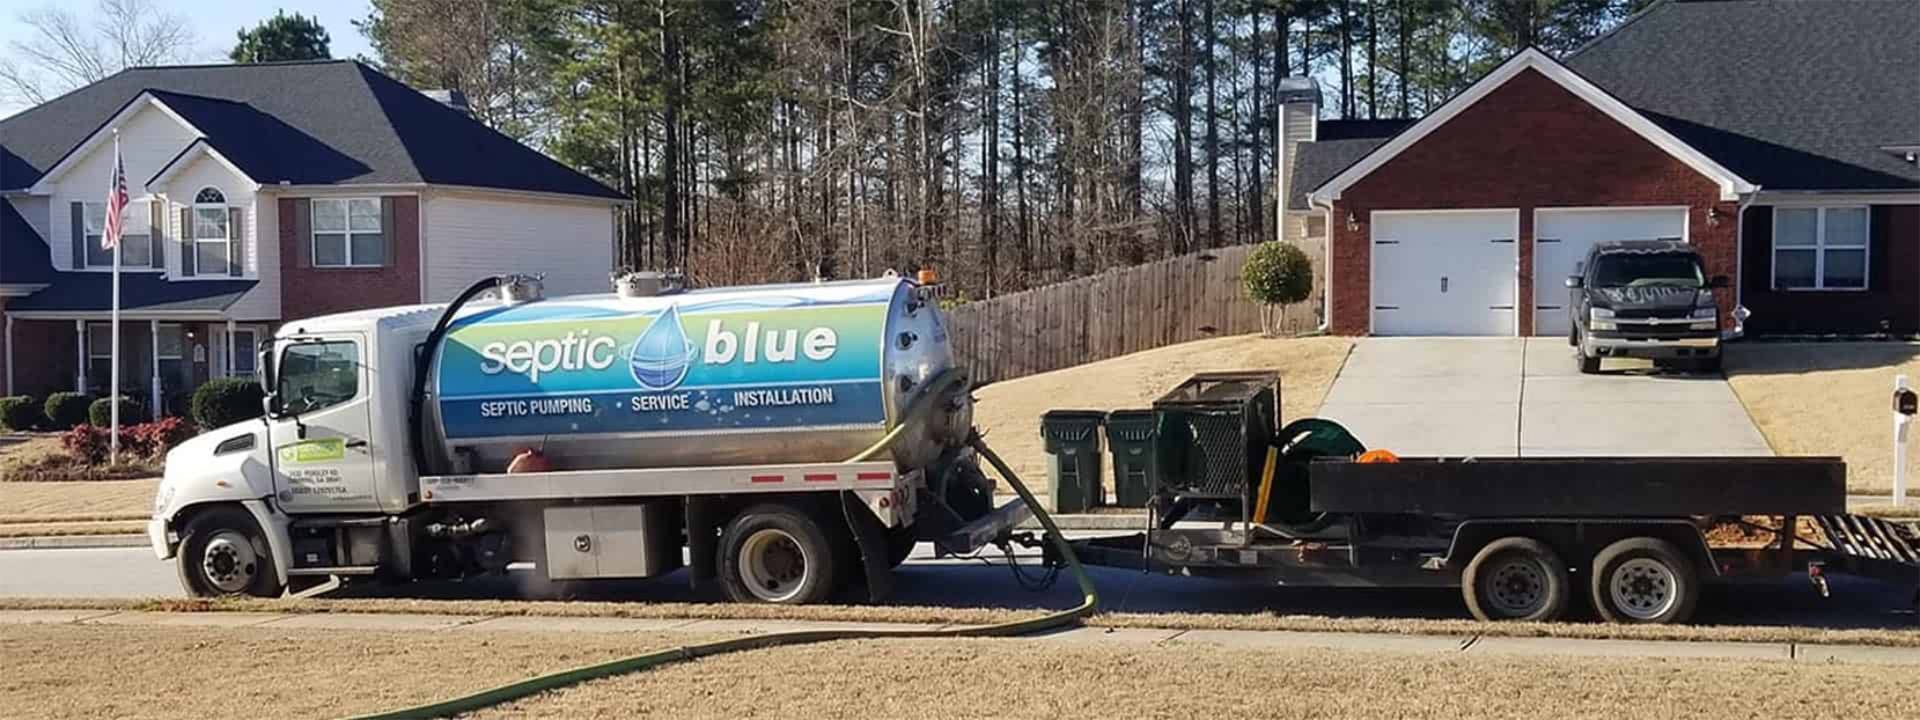 Finding a Reliable Septic Company